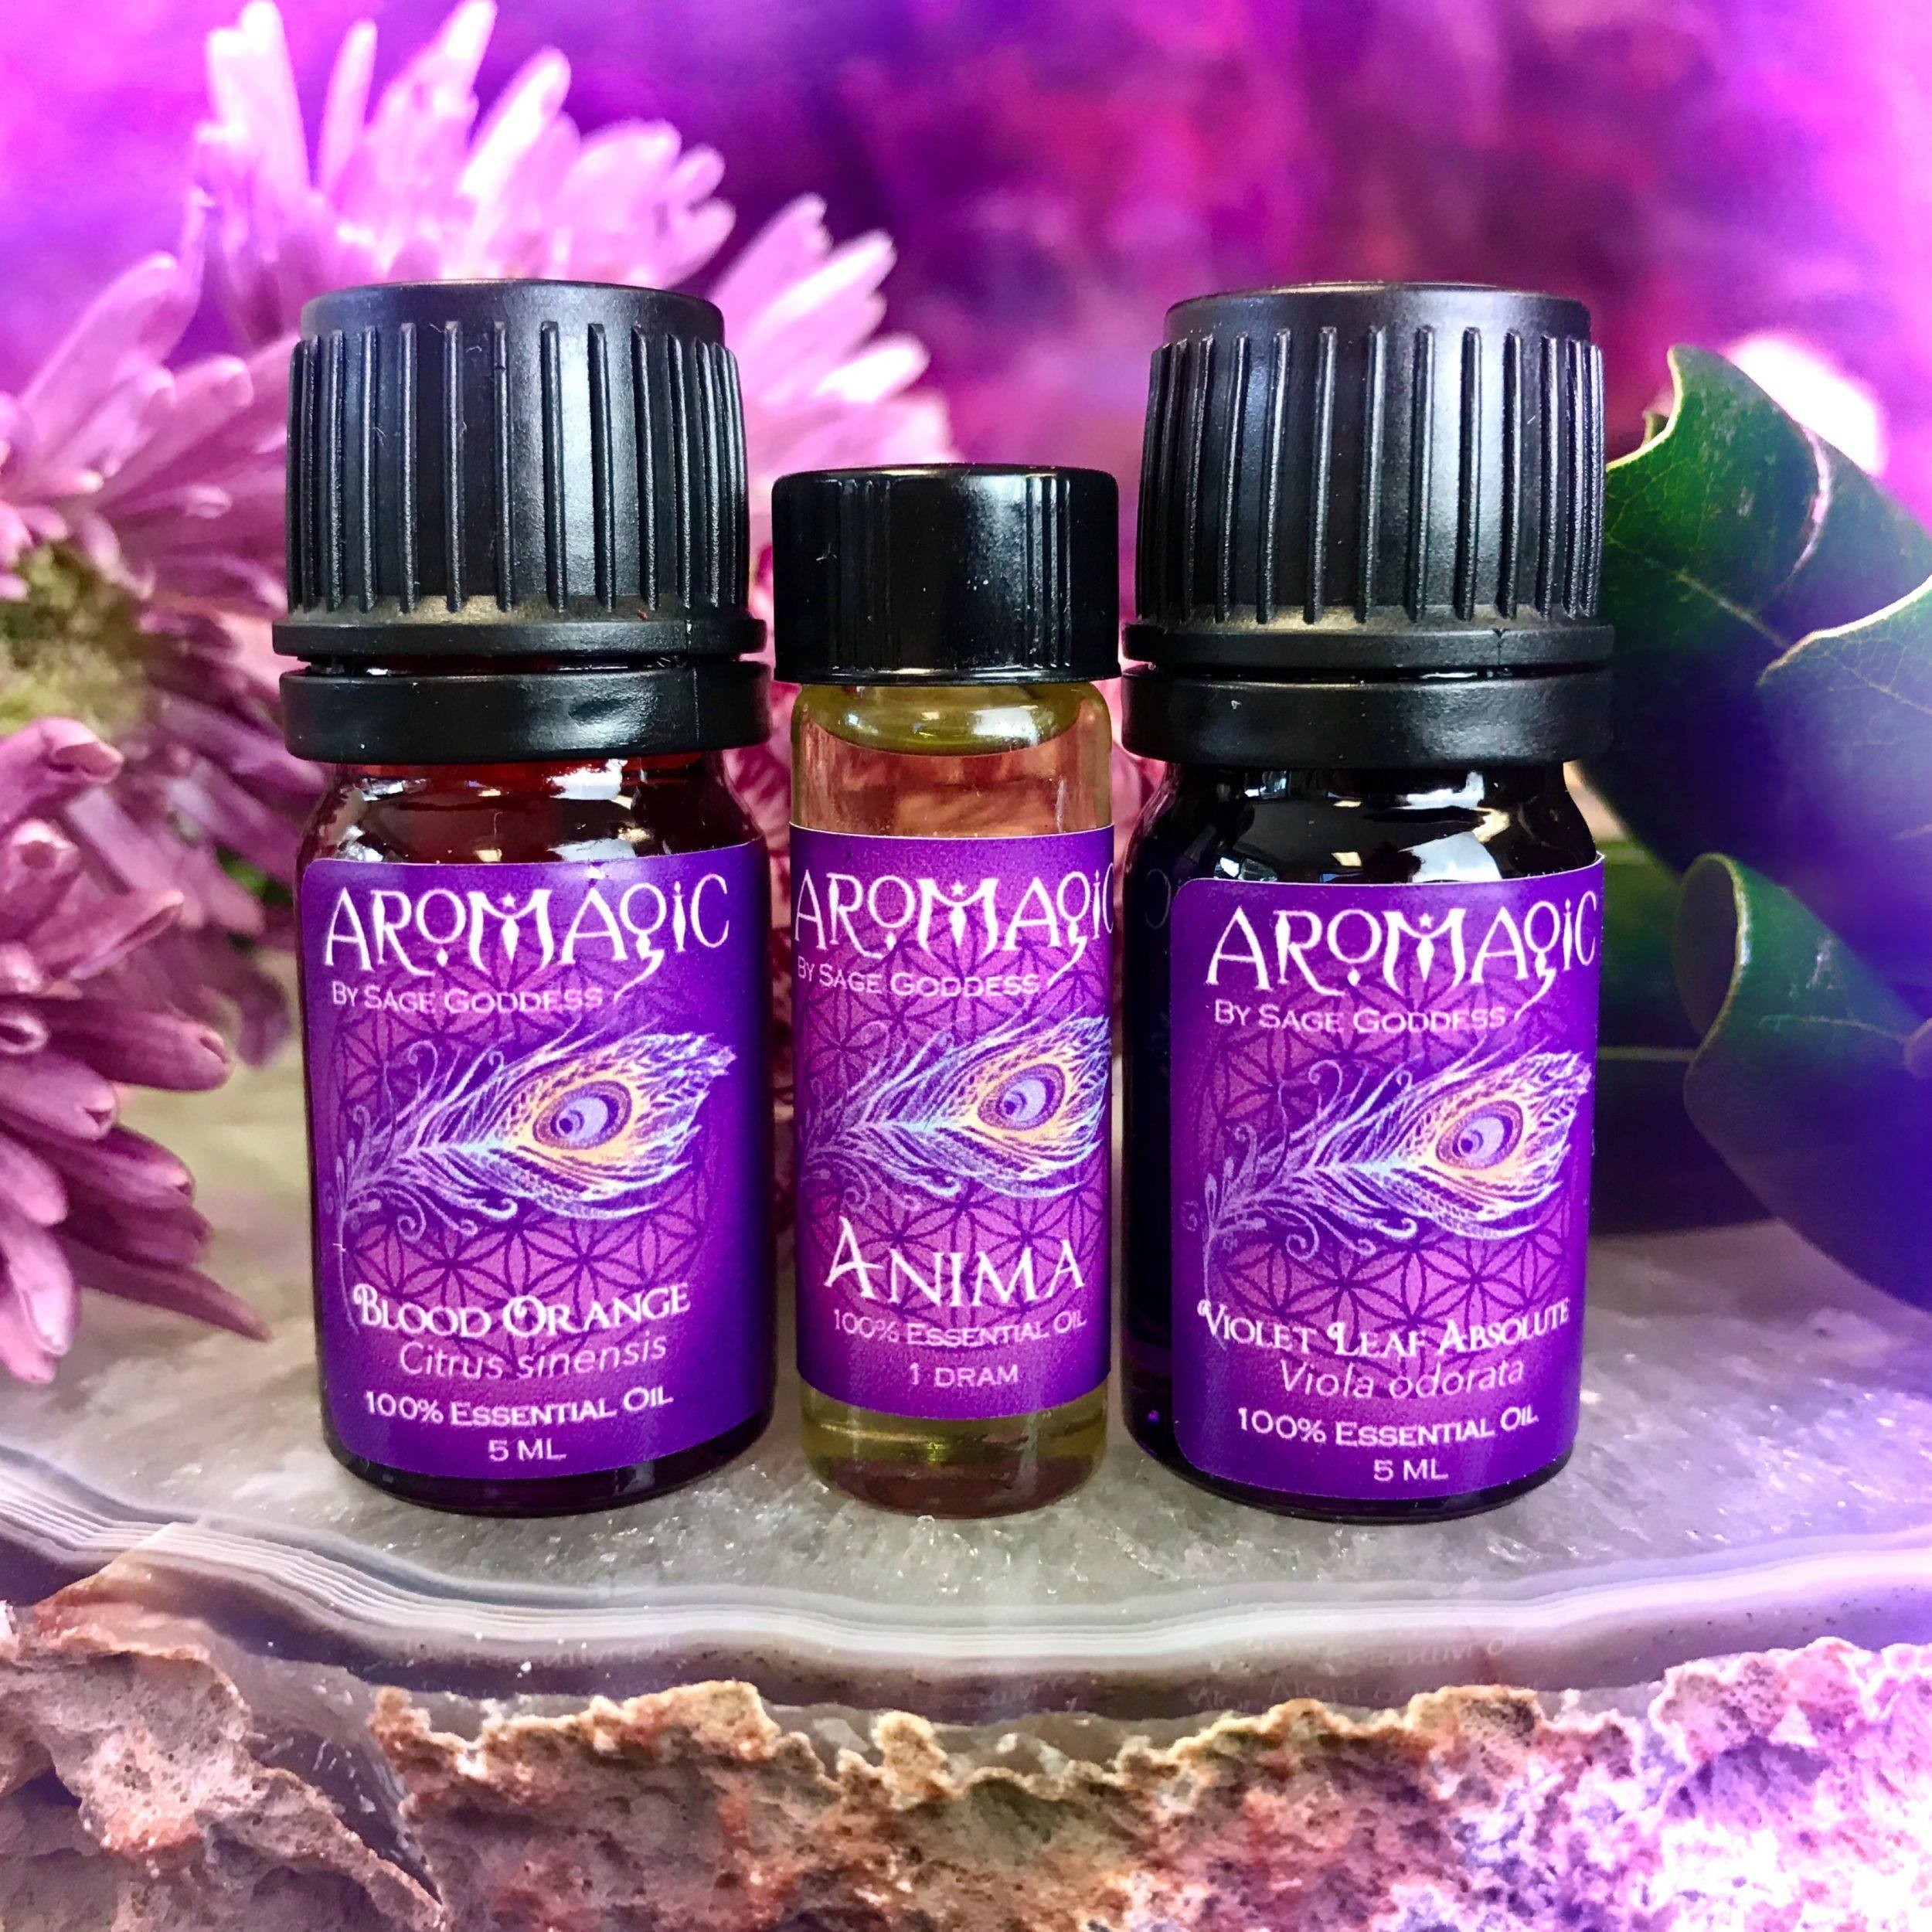 Violet Leaf Absolute Oil - Essential Oil Apothecary